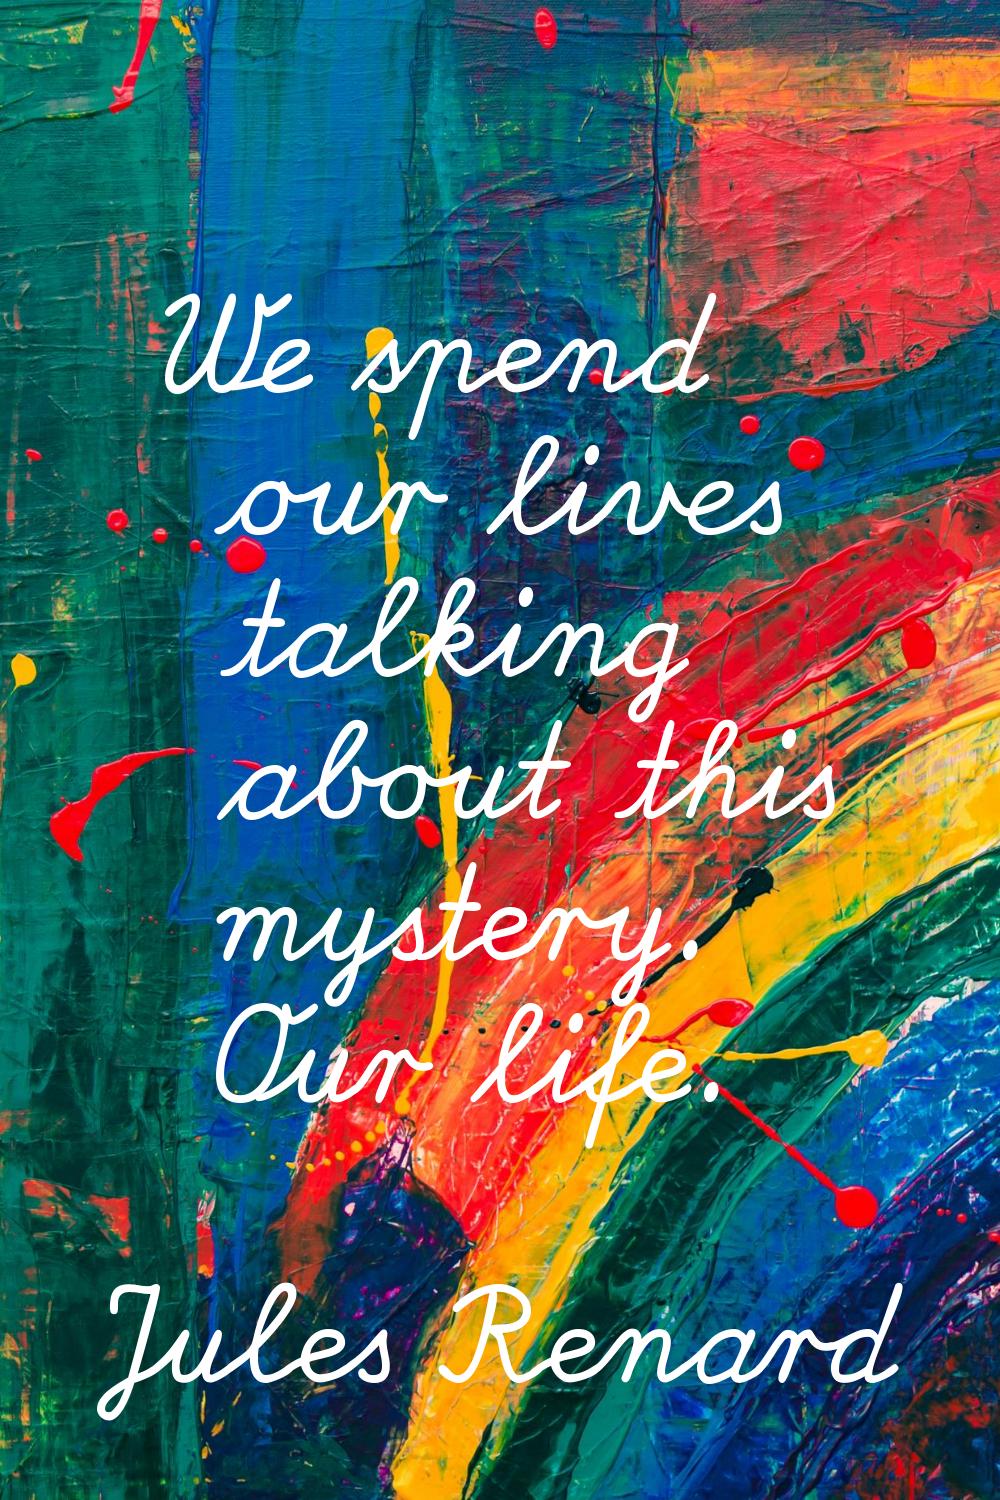 We spend our lives talking about this mystery. Our life.